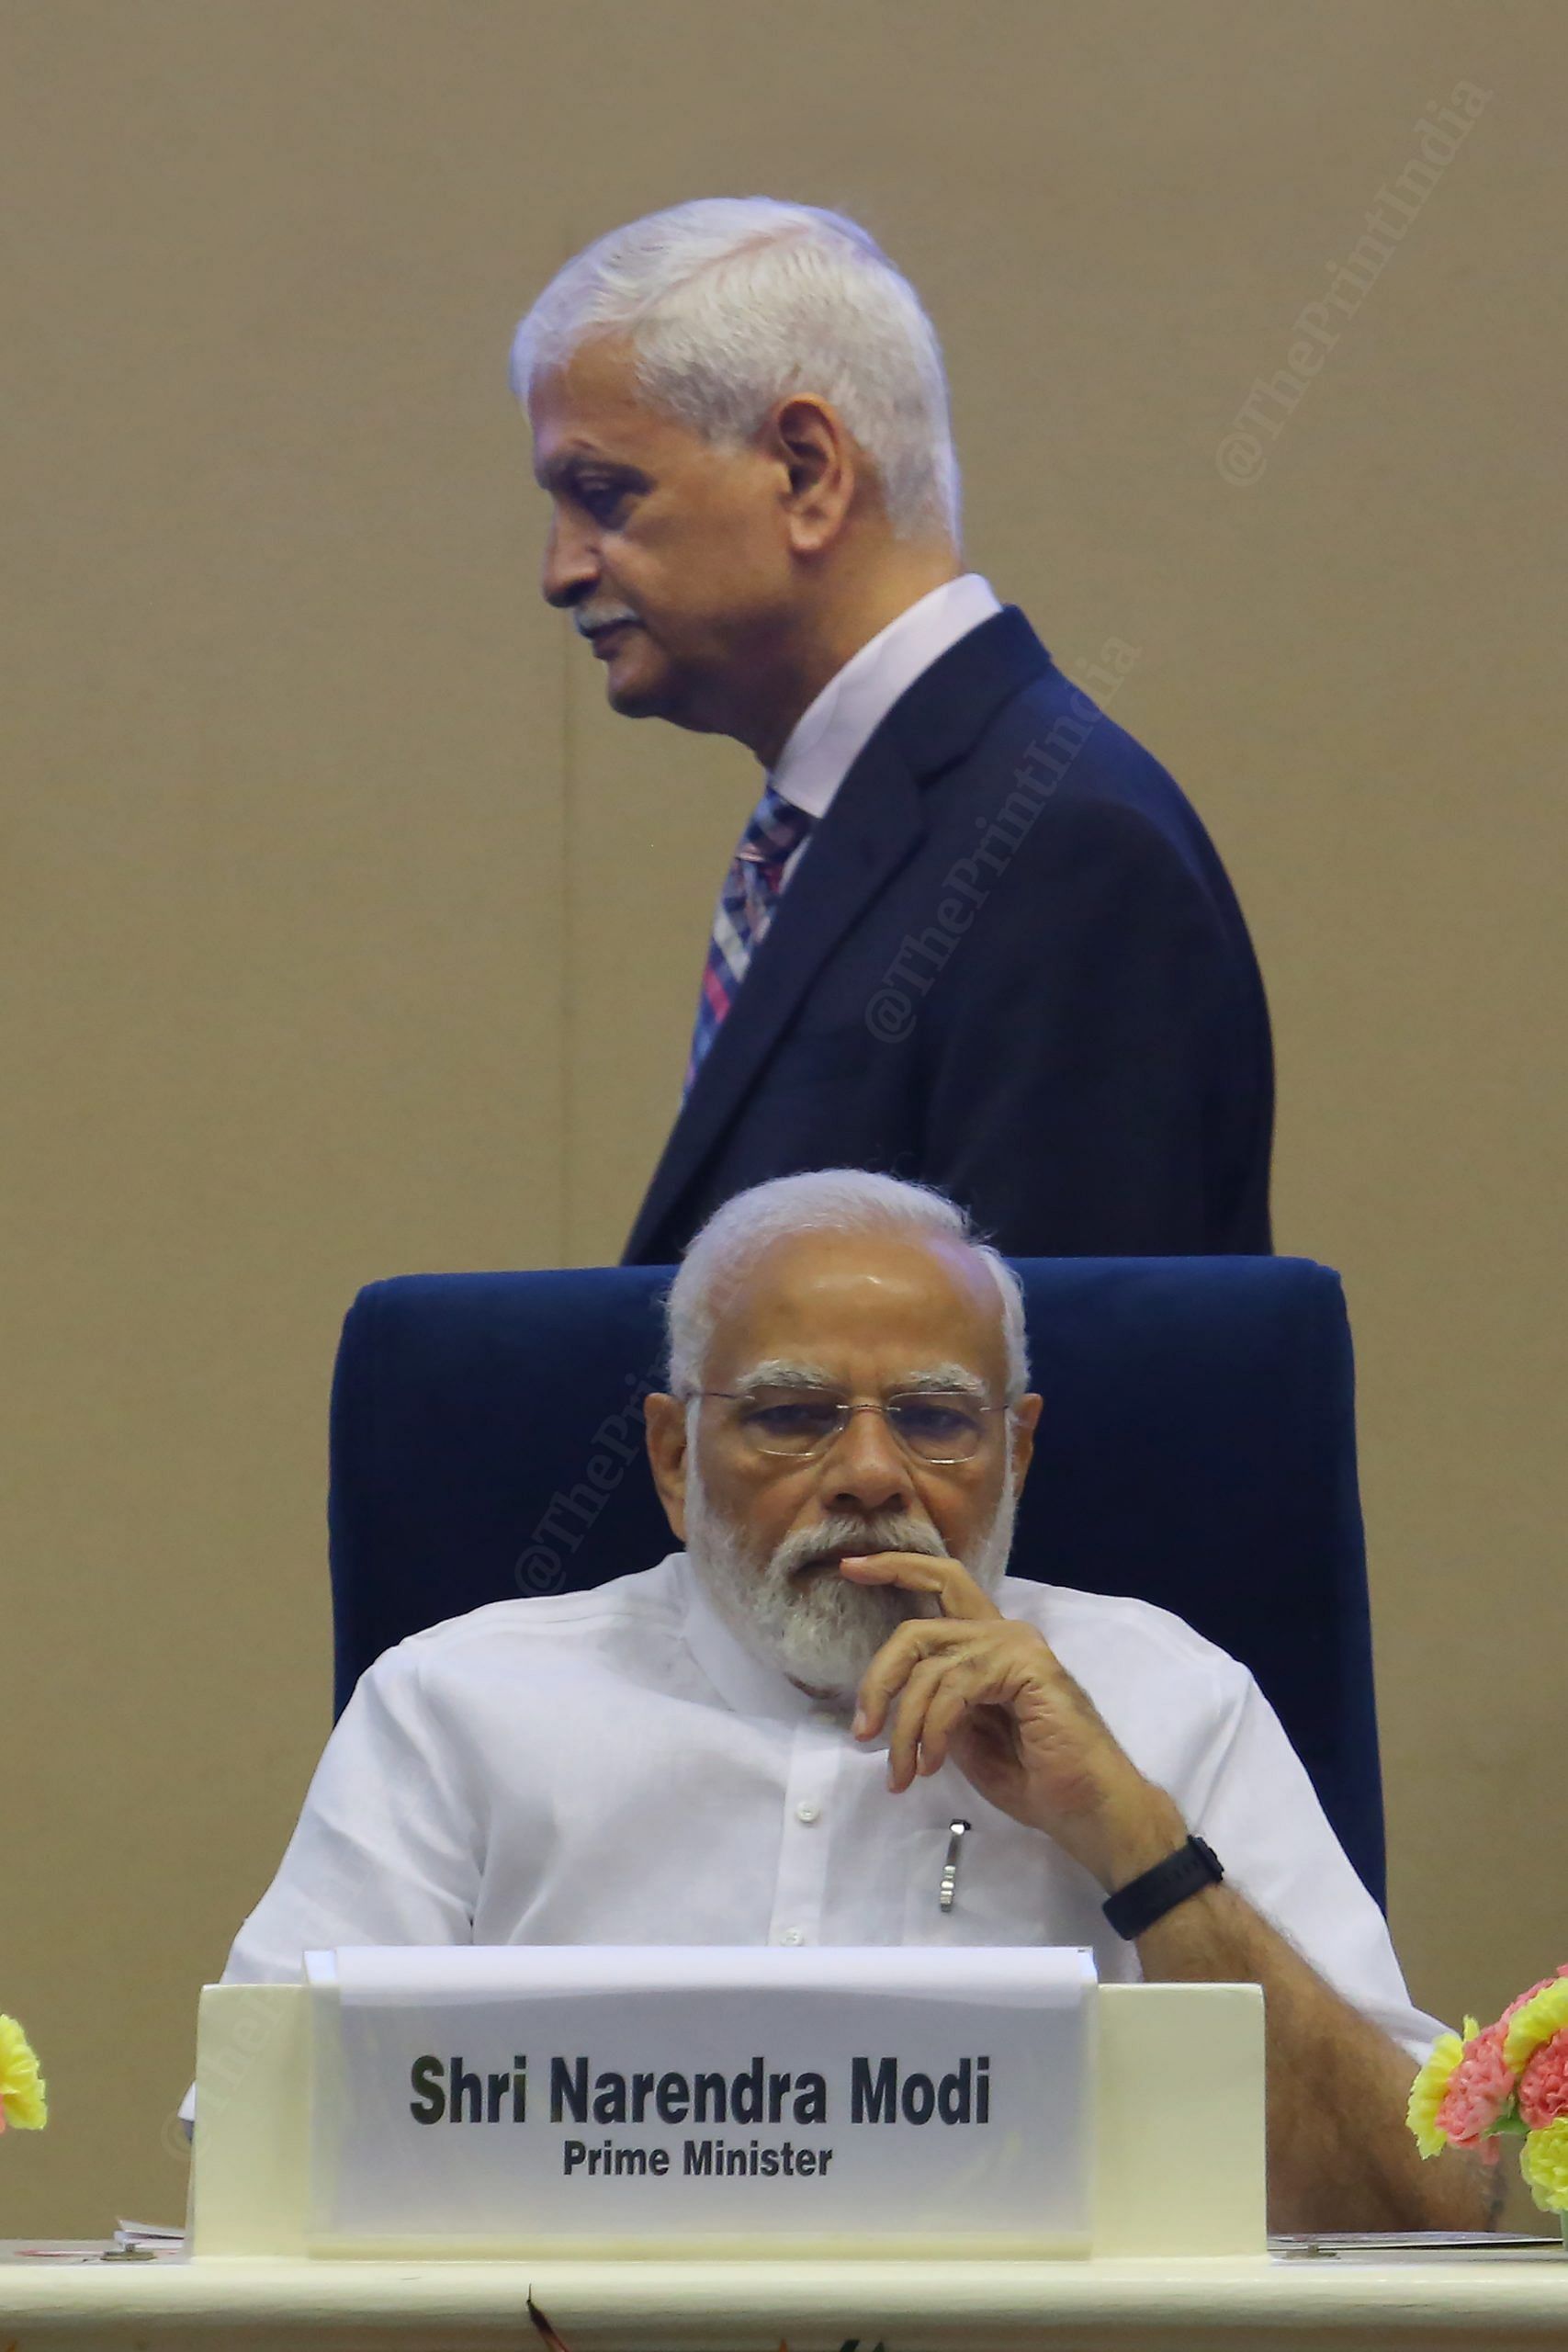 Prime Minister Narendra Modi and Justice Uday Umesh Lalit during an event | Praveen Jain | ThePrint